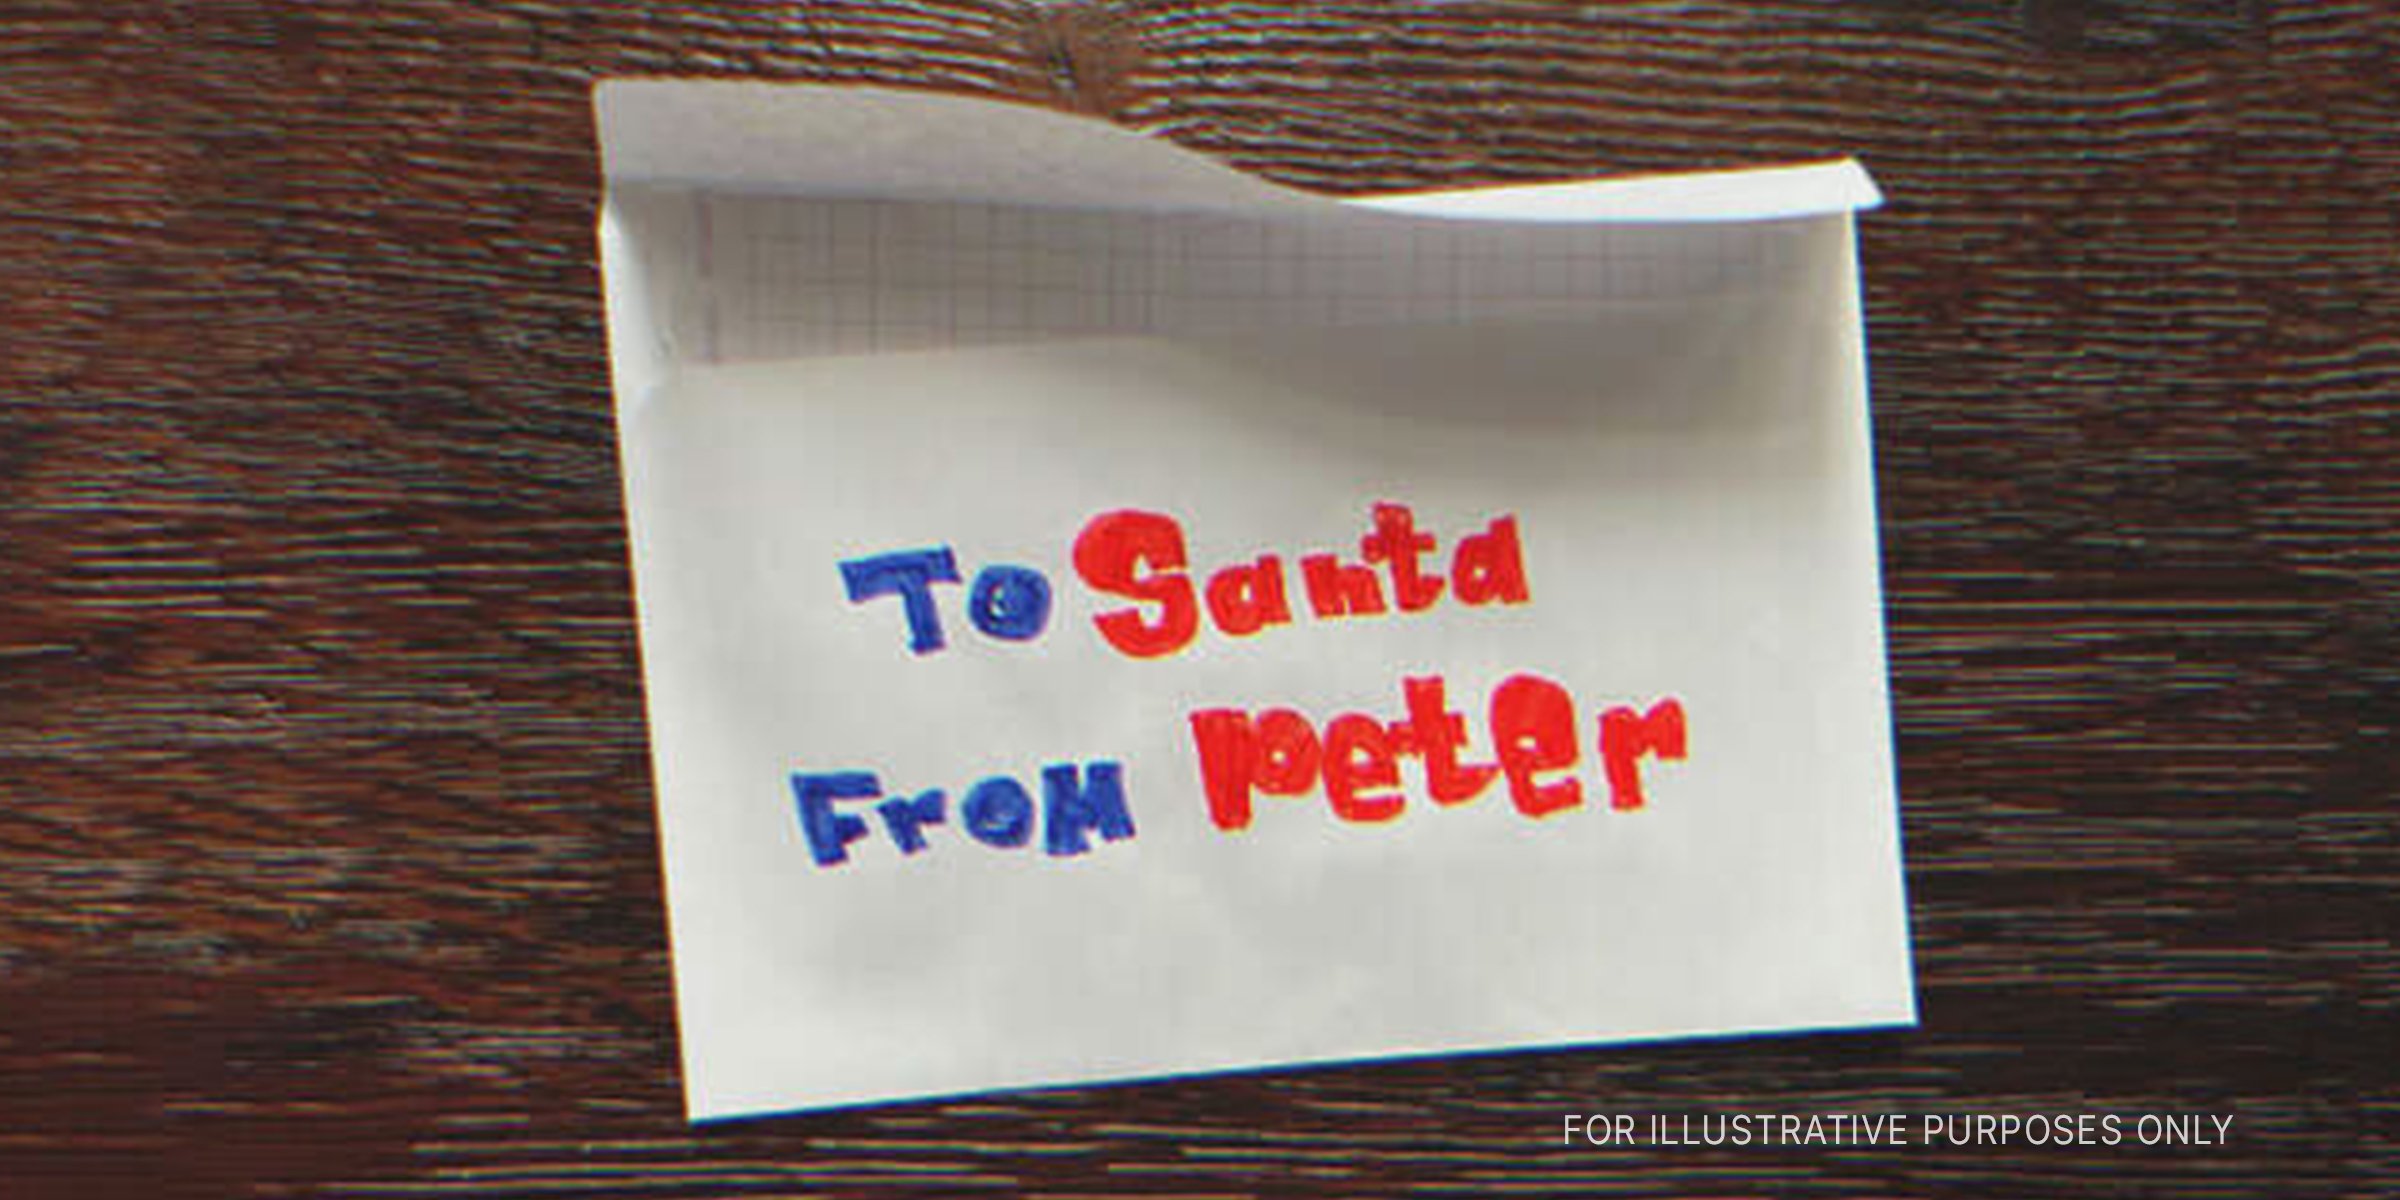 Envelope 'To Santa from Peter' | Source: AmoMama